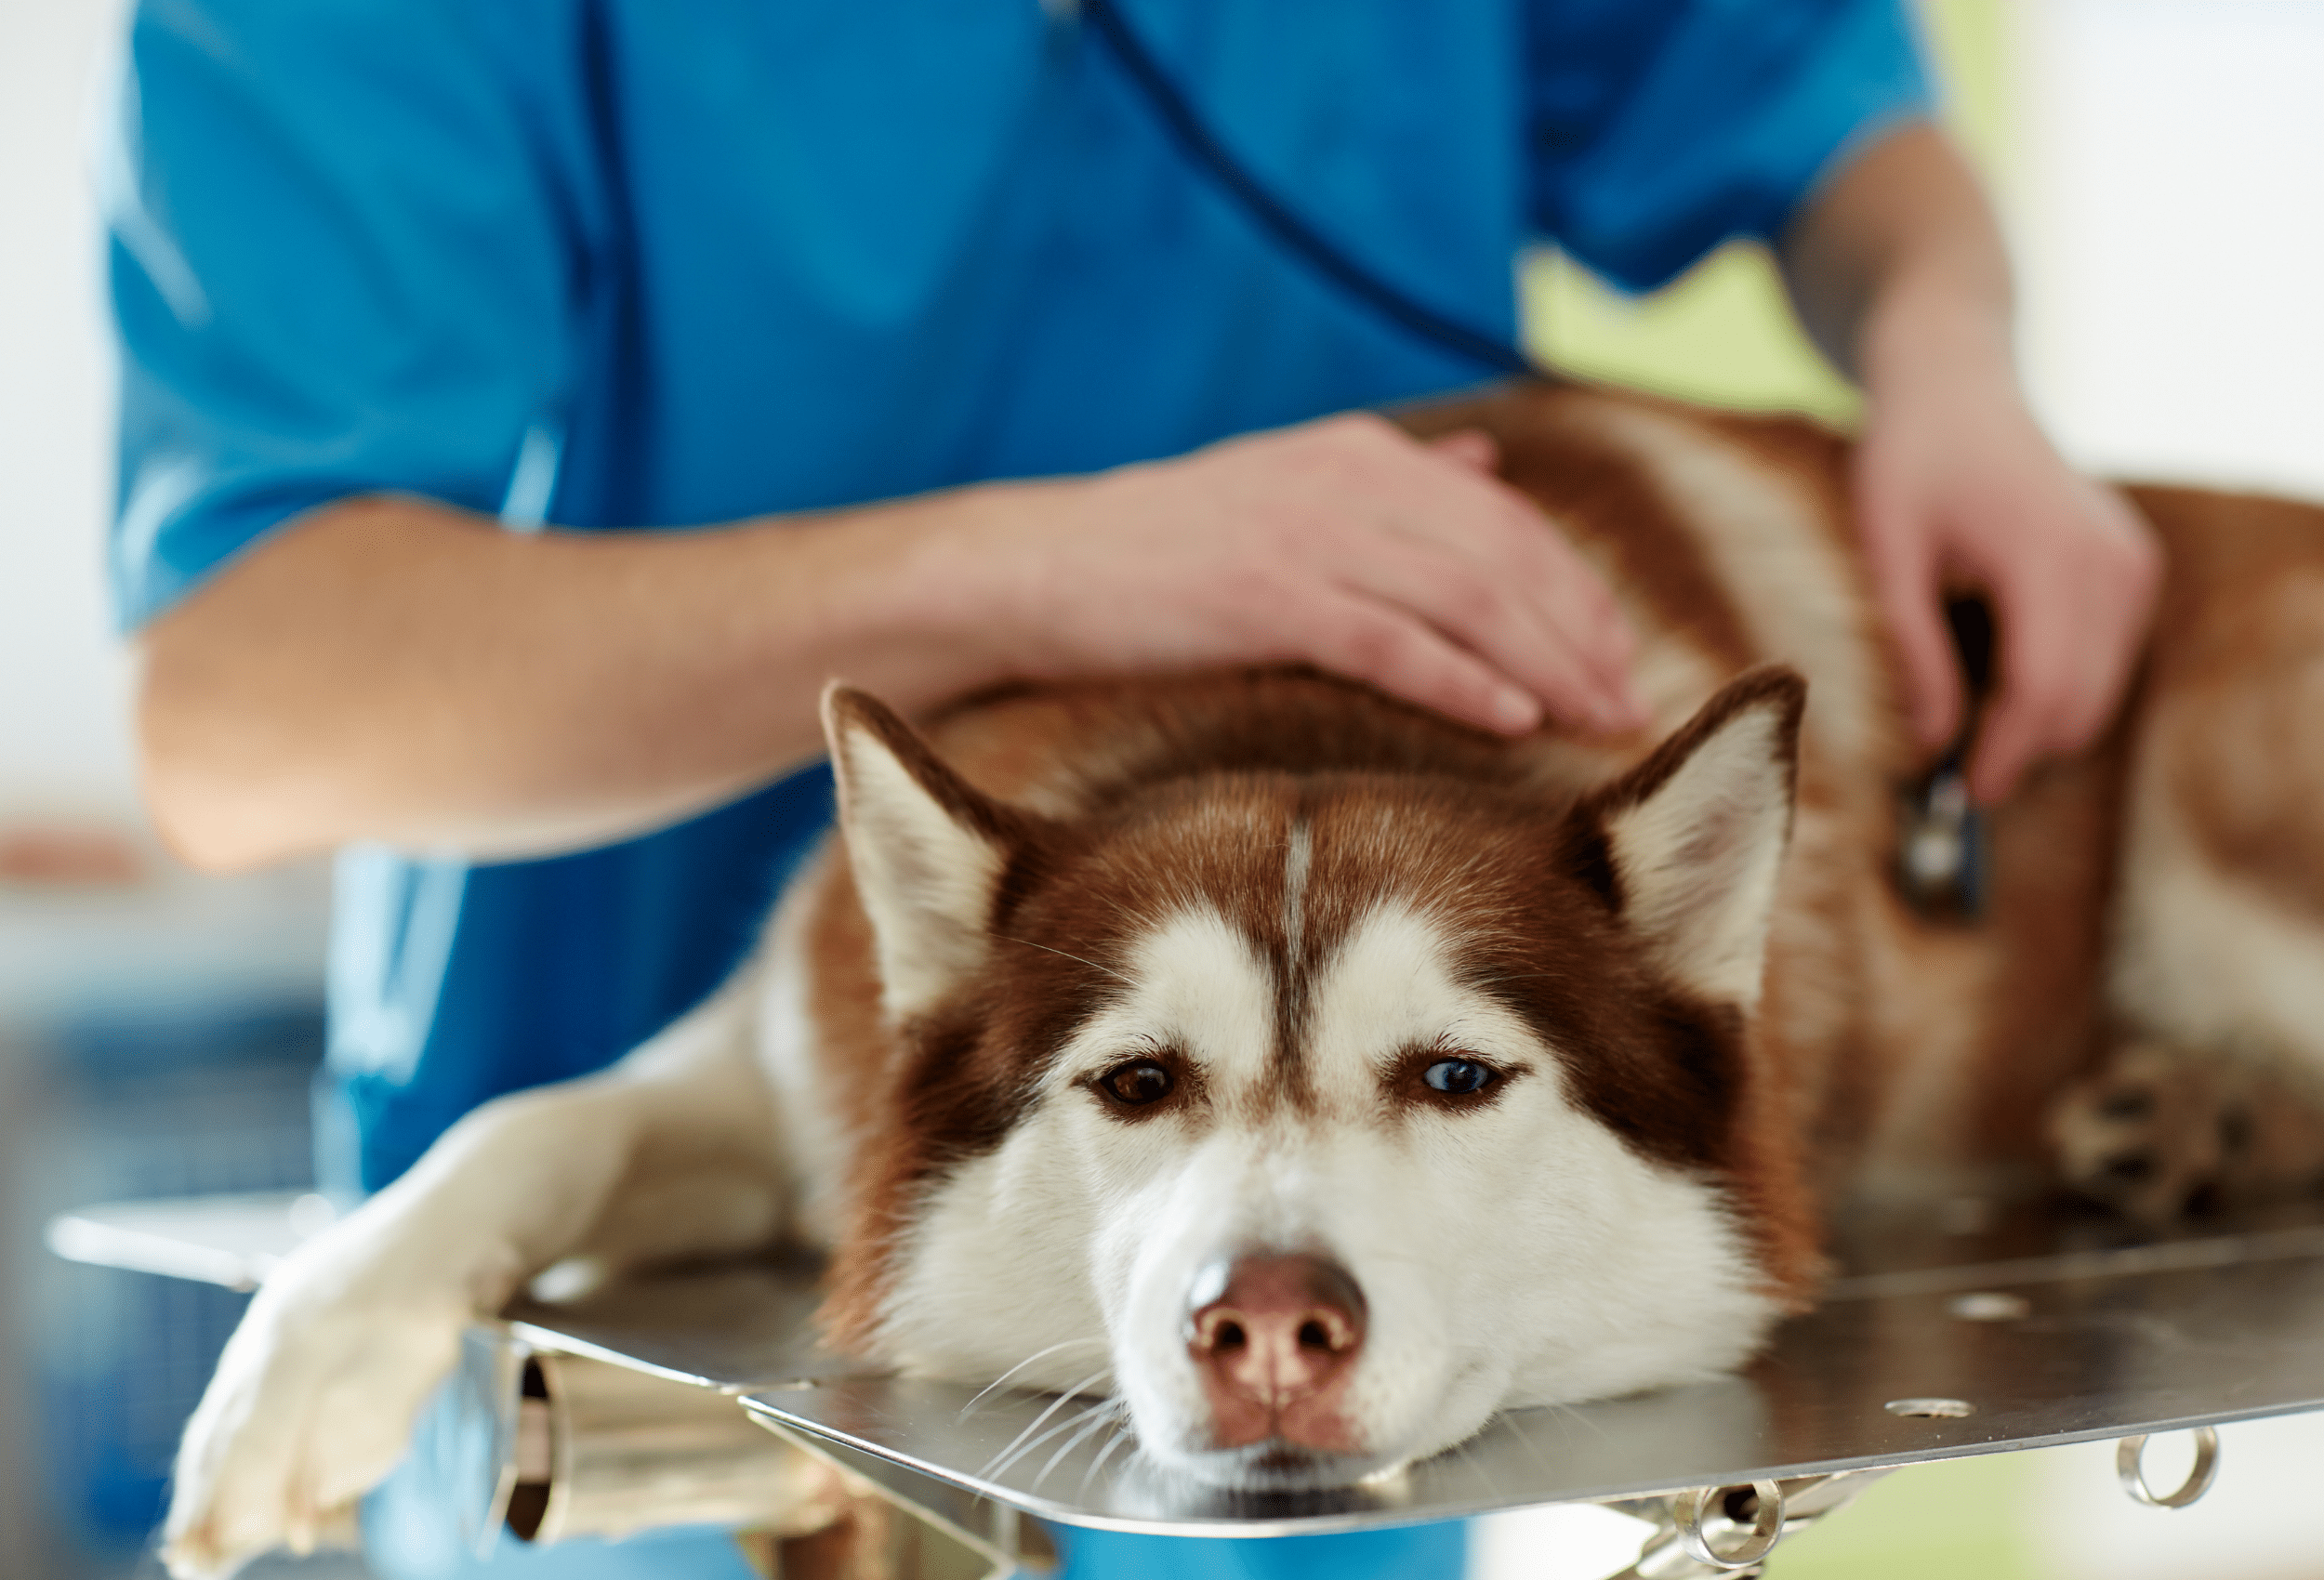 What to give a dog for upset stomach and how to know if it is an emergency.